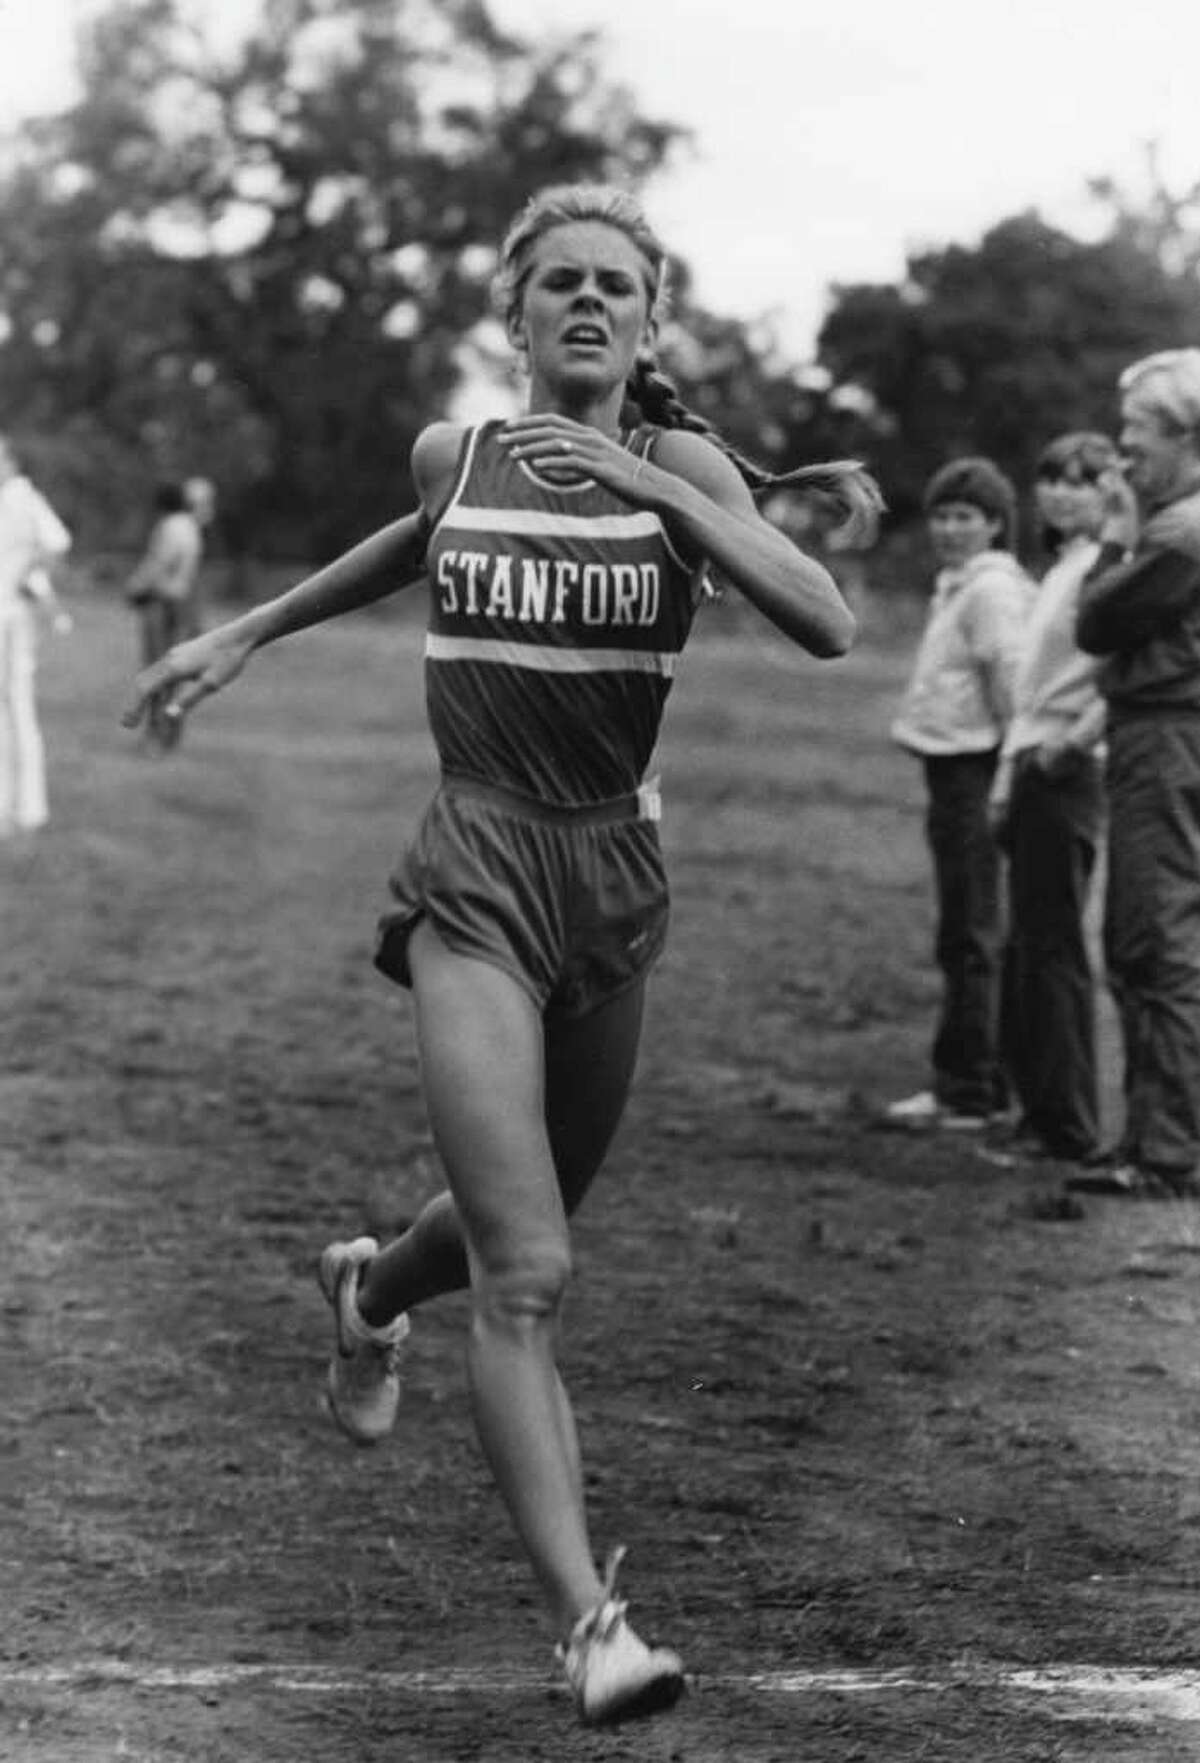 Greenwich High School graduate Ceci Hopp St. Geme, shown here at Stanford University, was one of six new members selected to be inducted into the Fairfield County Sports Hall of Fame. St. Geme, who broke four FCIAC and two state records during her cross country and track and field career at Greenwich High, gained national prominence when she won the Kinney (now Foot Locker) National Cross Country Championship in 1980. The standout runner, who won the NCAA title in the 3,000-meter run as a junior at Stanford University, will be honored during an induction ceremony at the commission’s seventh annual sports awards dinner on Oct. 17 at the Hyatt Regency Greenwich.